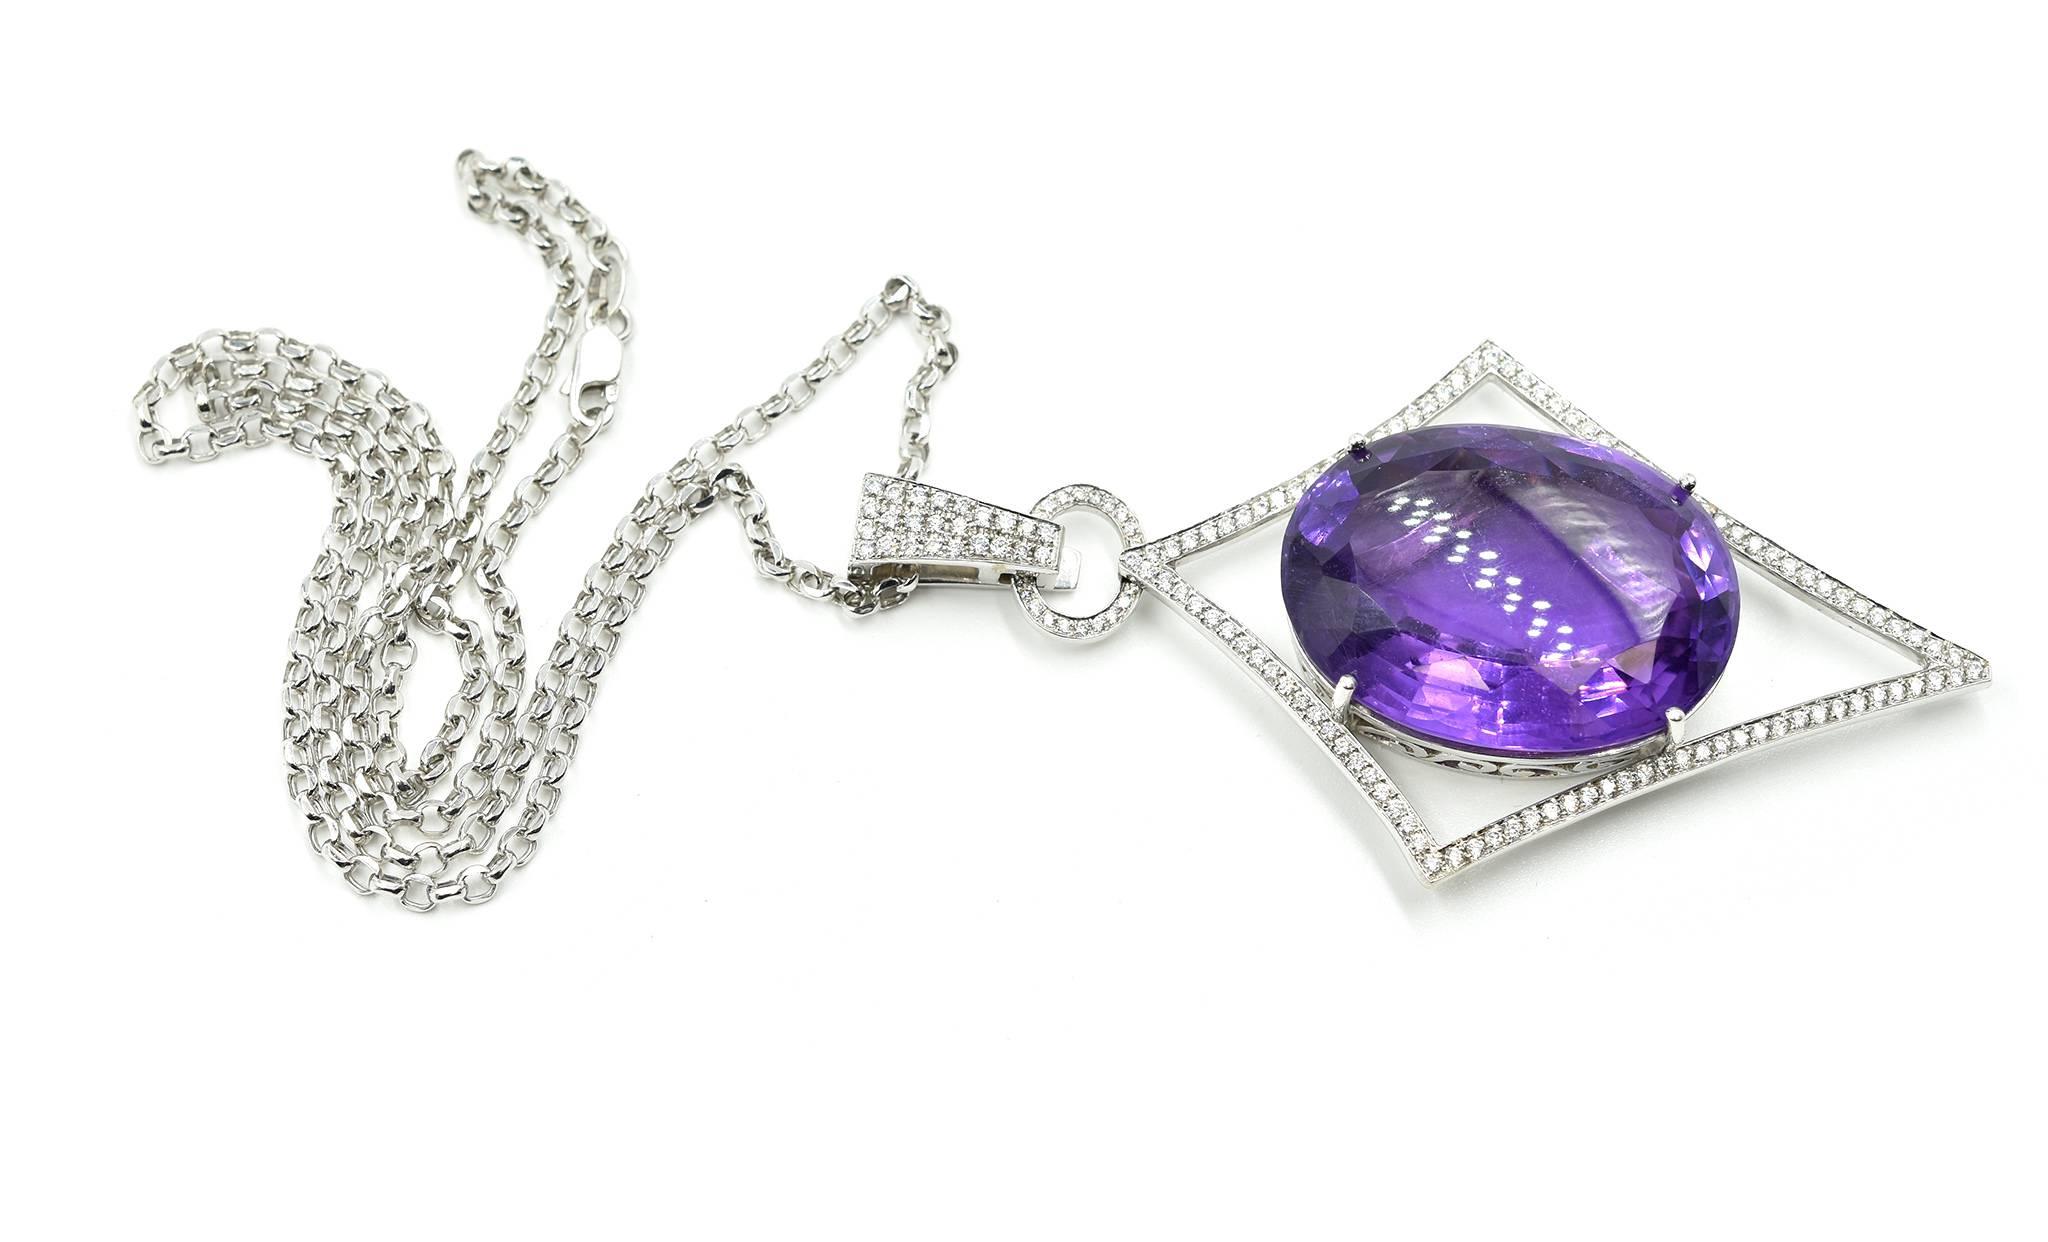 This is a fantastic design! Featured is a jaw-dropping oval mixed cut 53ct amethyst prong set in the 14k white gold navette-shaped pendant! The pendant is shaped like an arrow pointing down, measuring 81.30mm from the bottom of the pendant to the